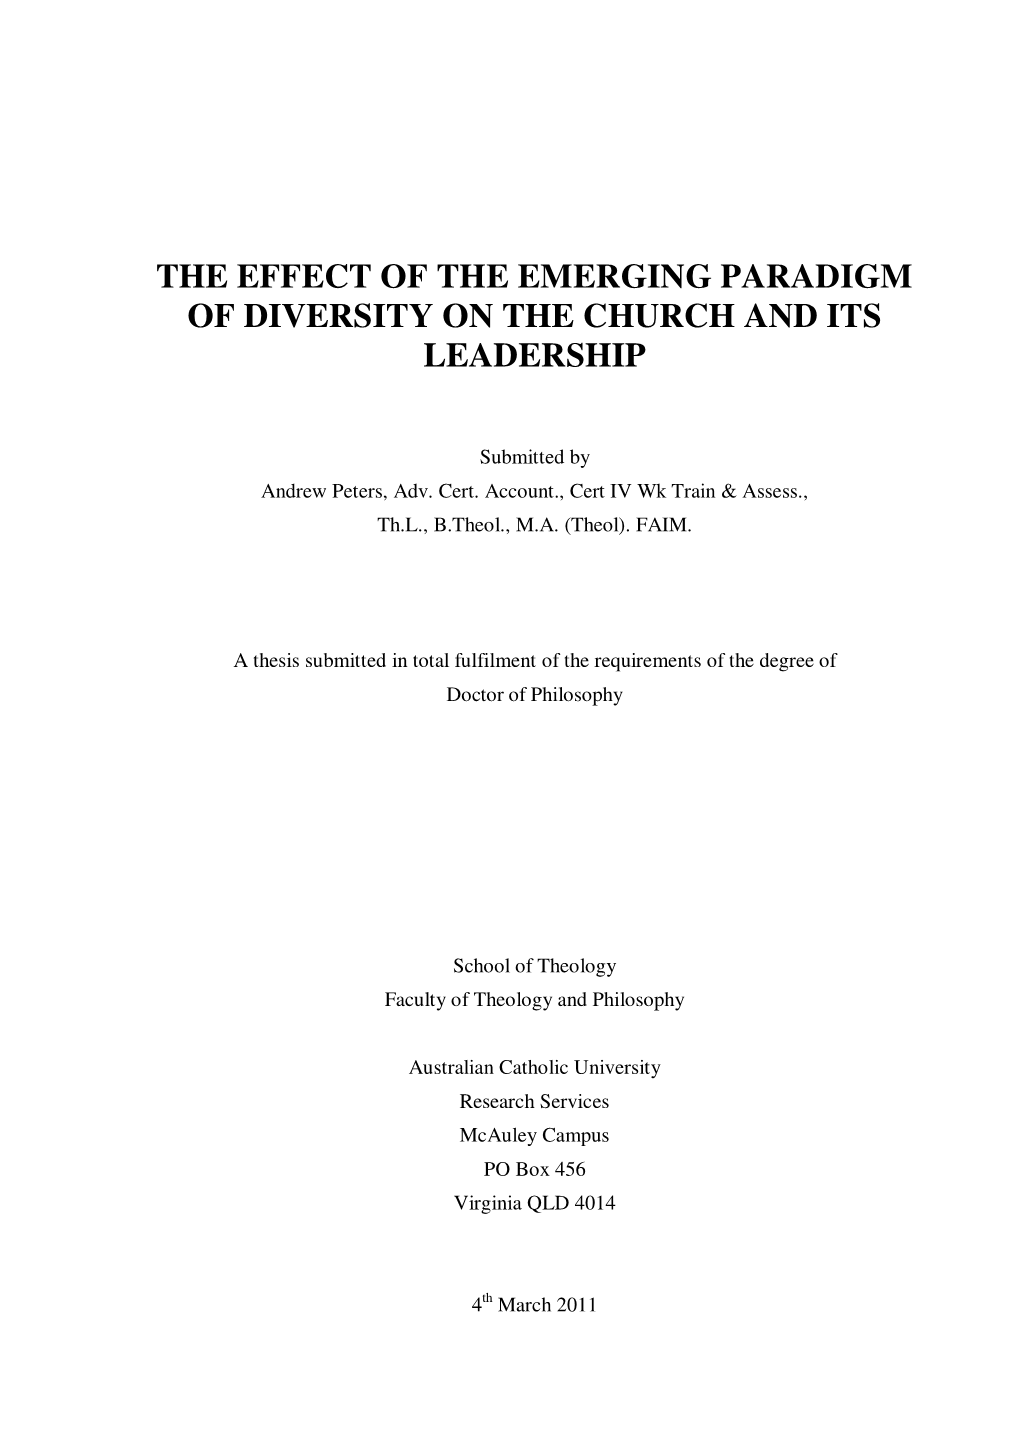 The Effect of the Emerging Paradigm of Diversity on the Church and Its Leadership